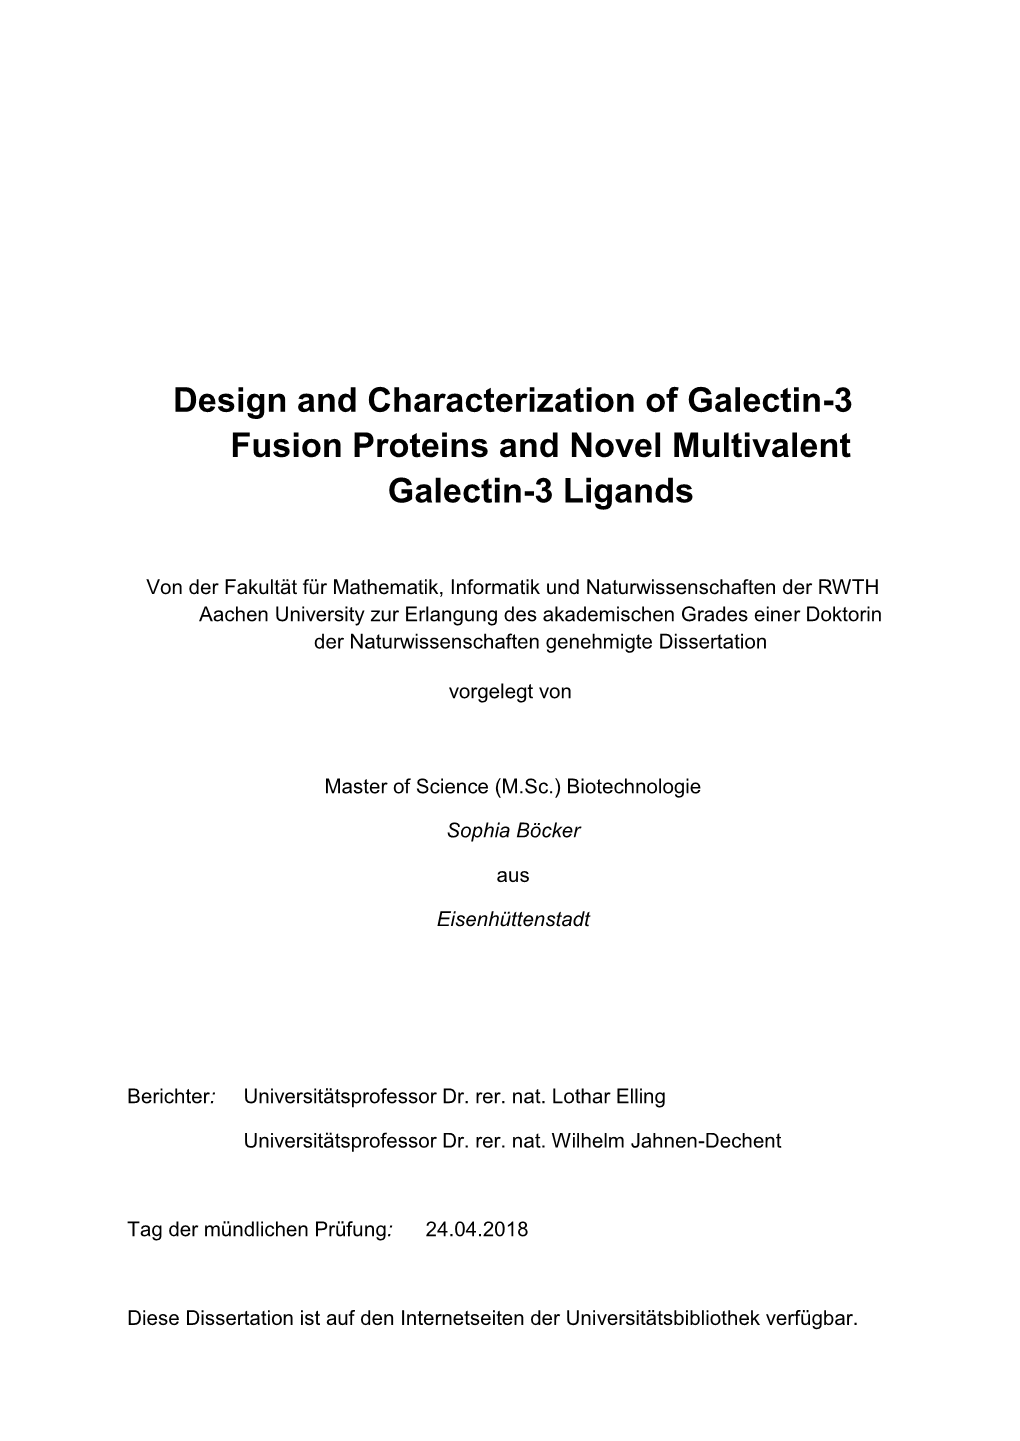 Design and Characterization of Galectin-3 Fusion Proteins and Novel Multivalent Galectin-3 Ligands